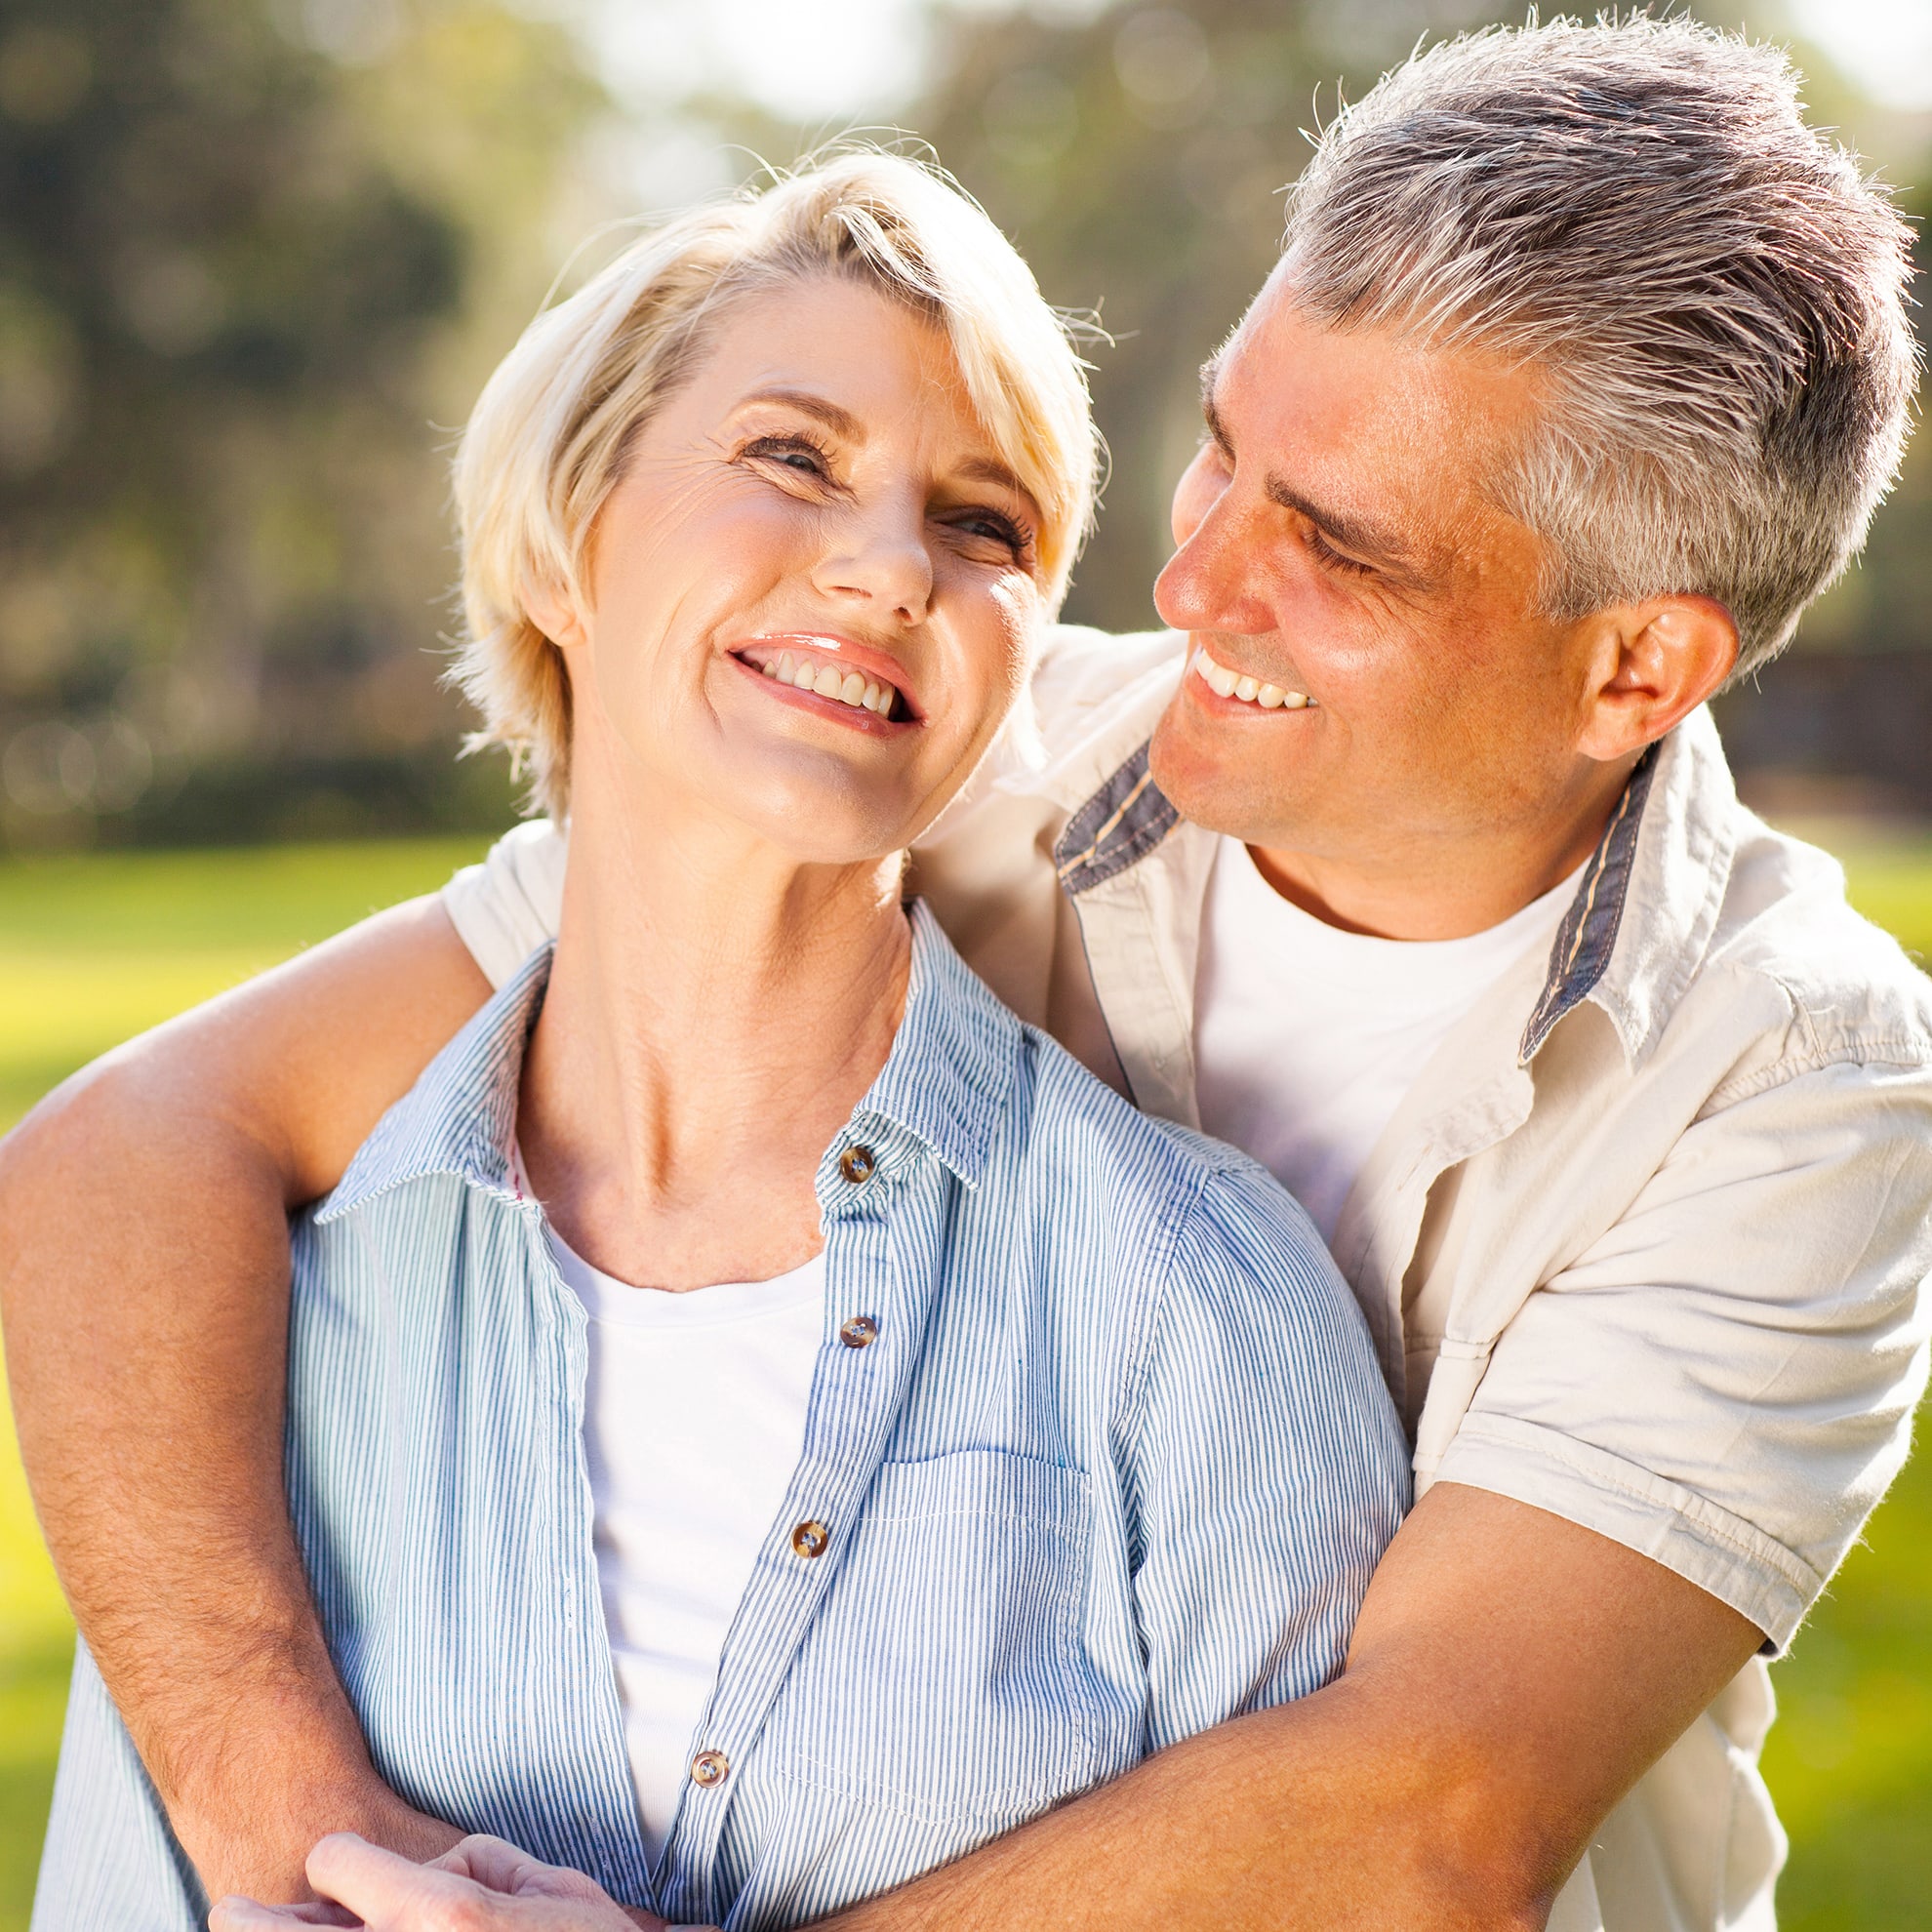 Older couple holding and looking at each other smiling against blurred out grass background